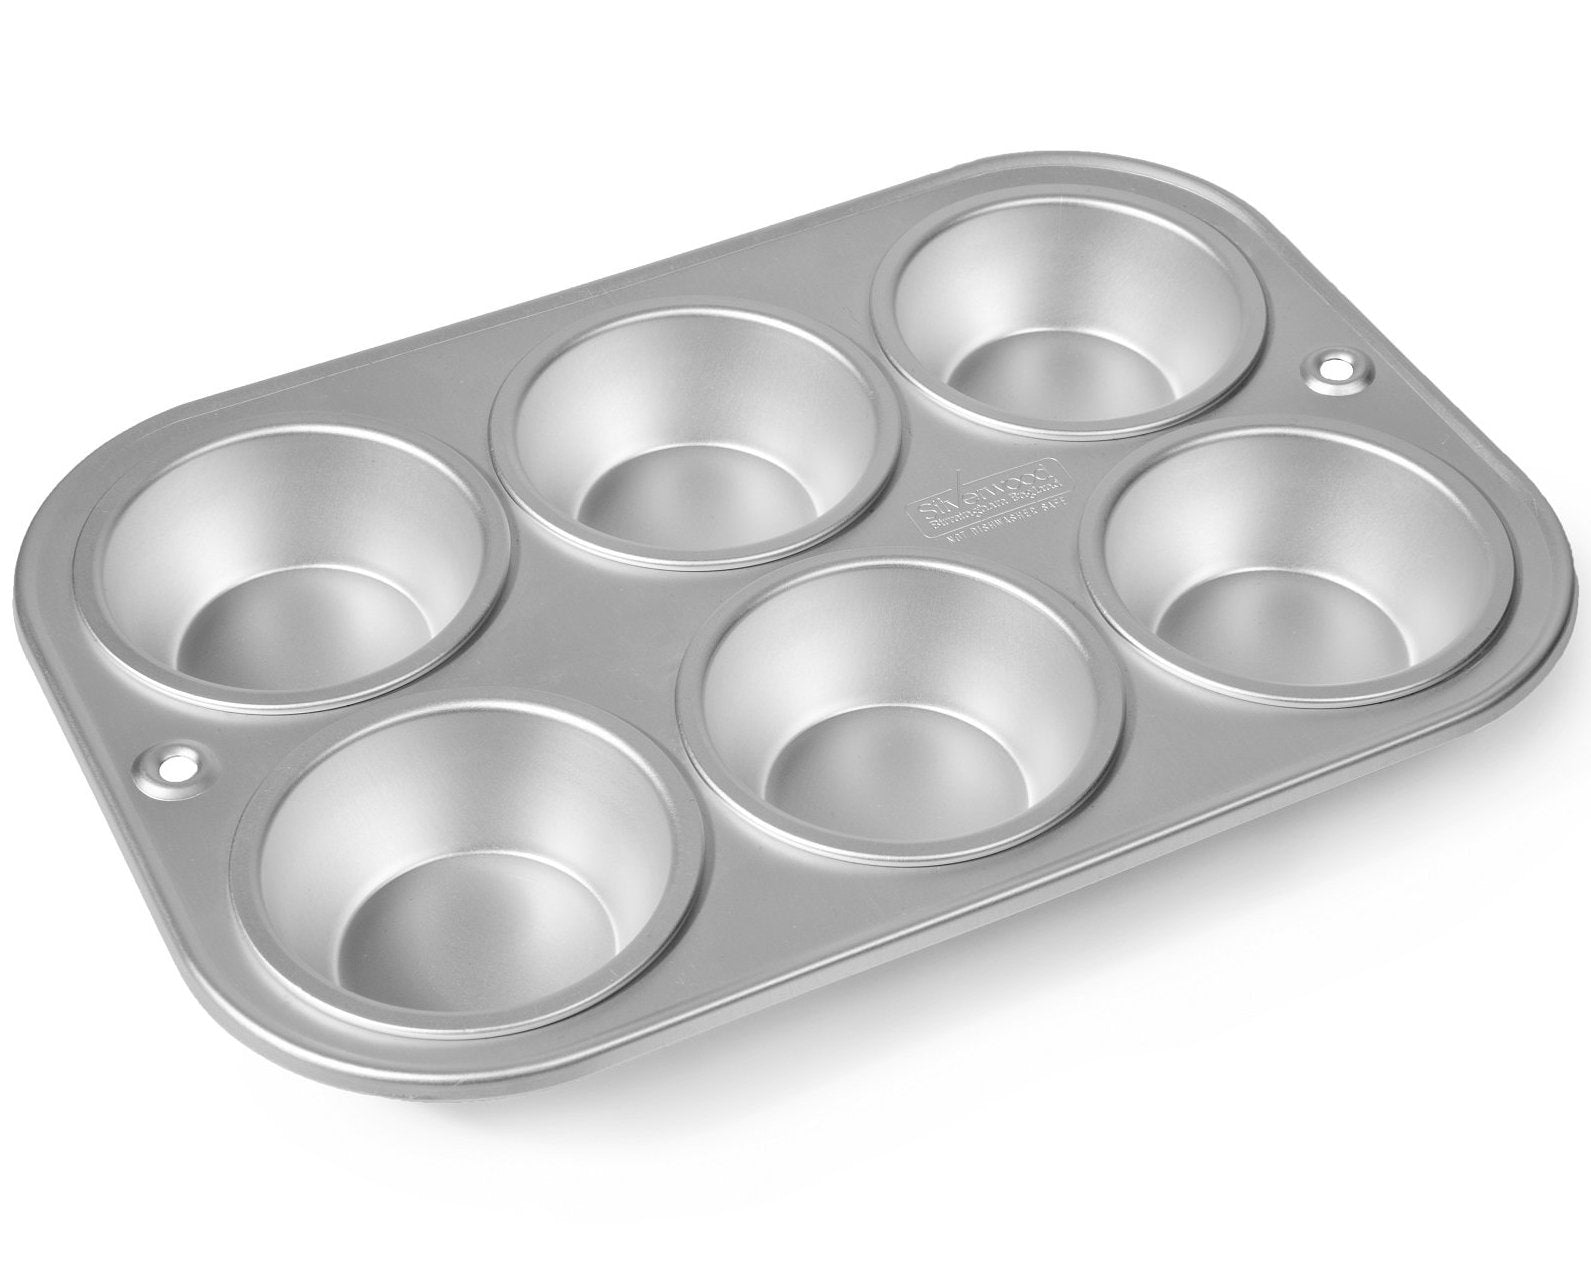 Standard Muffin Tray with 40 Moulds ⋆ American Pan IE